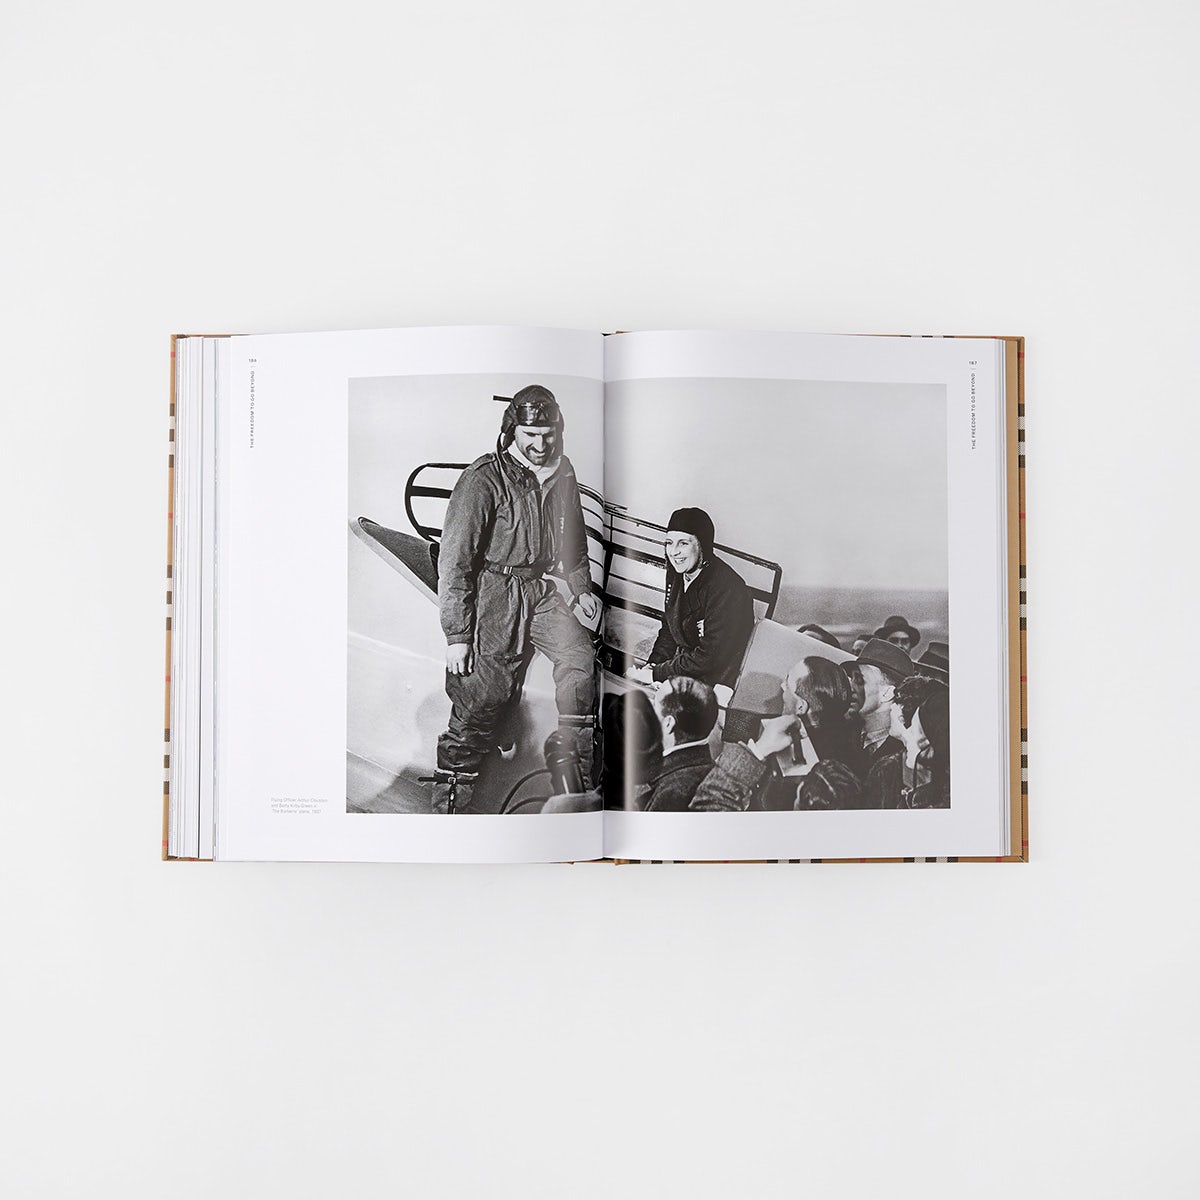 Image shows spreads from the new Burberry book